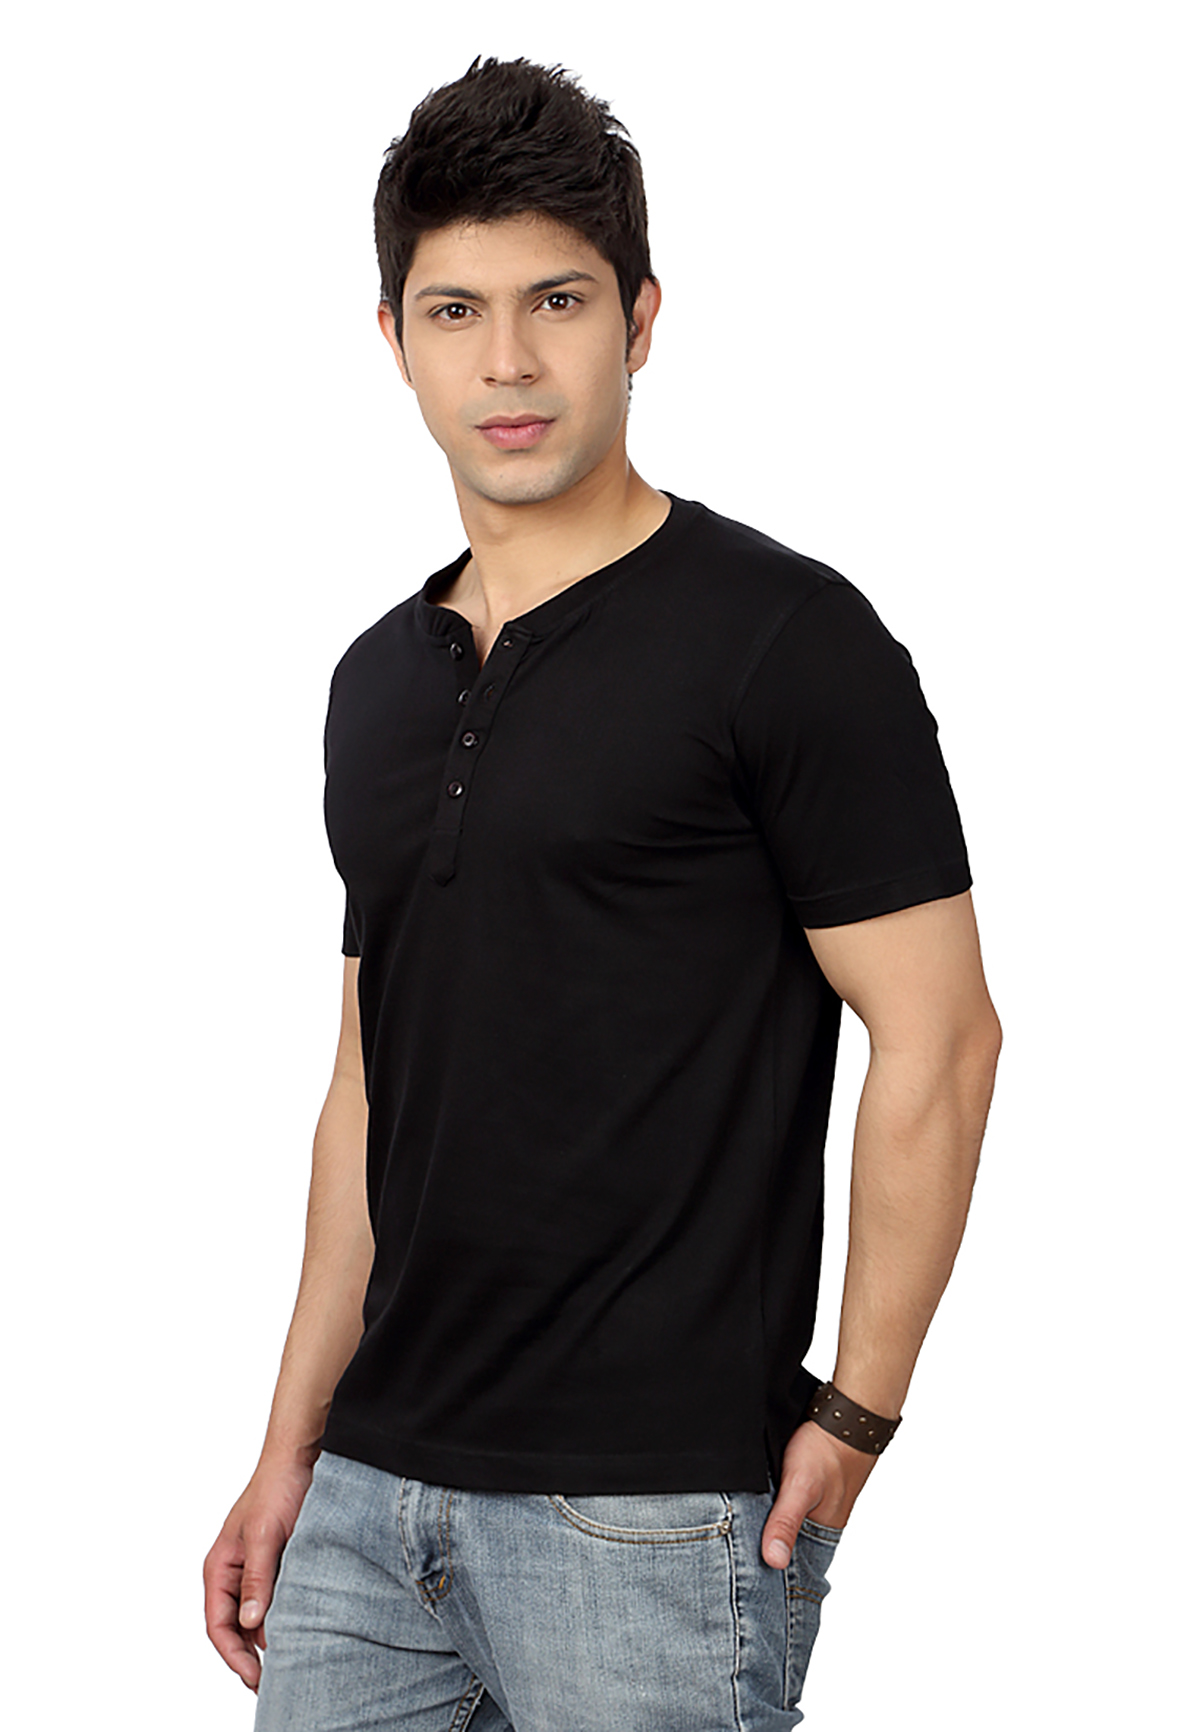 Buy Top Notch Solid Men's Henley Black T-Shirt Online @ ₹365 from ShopClues